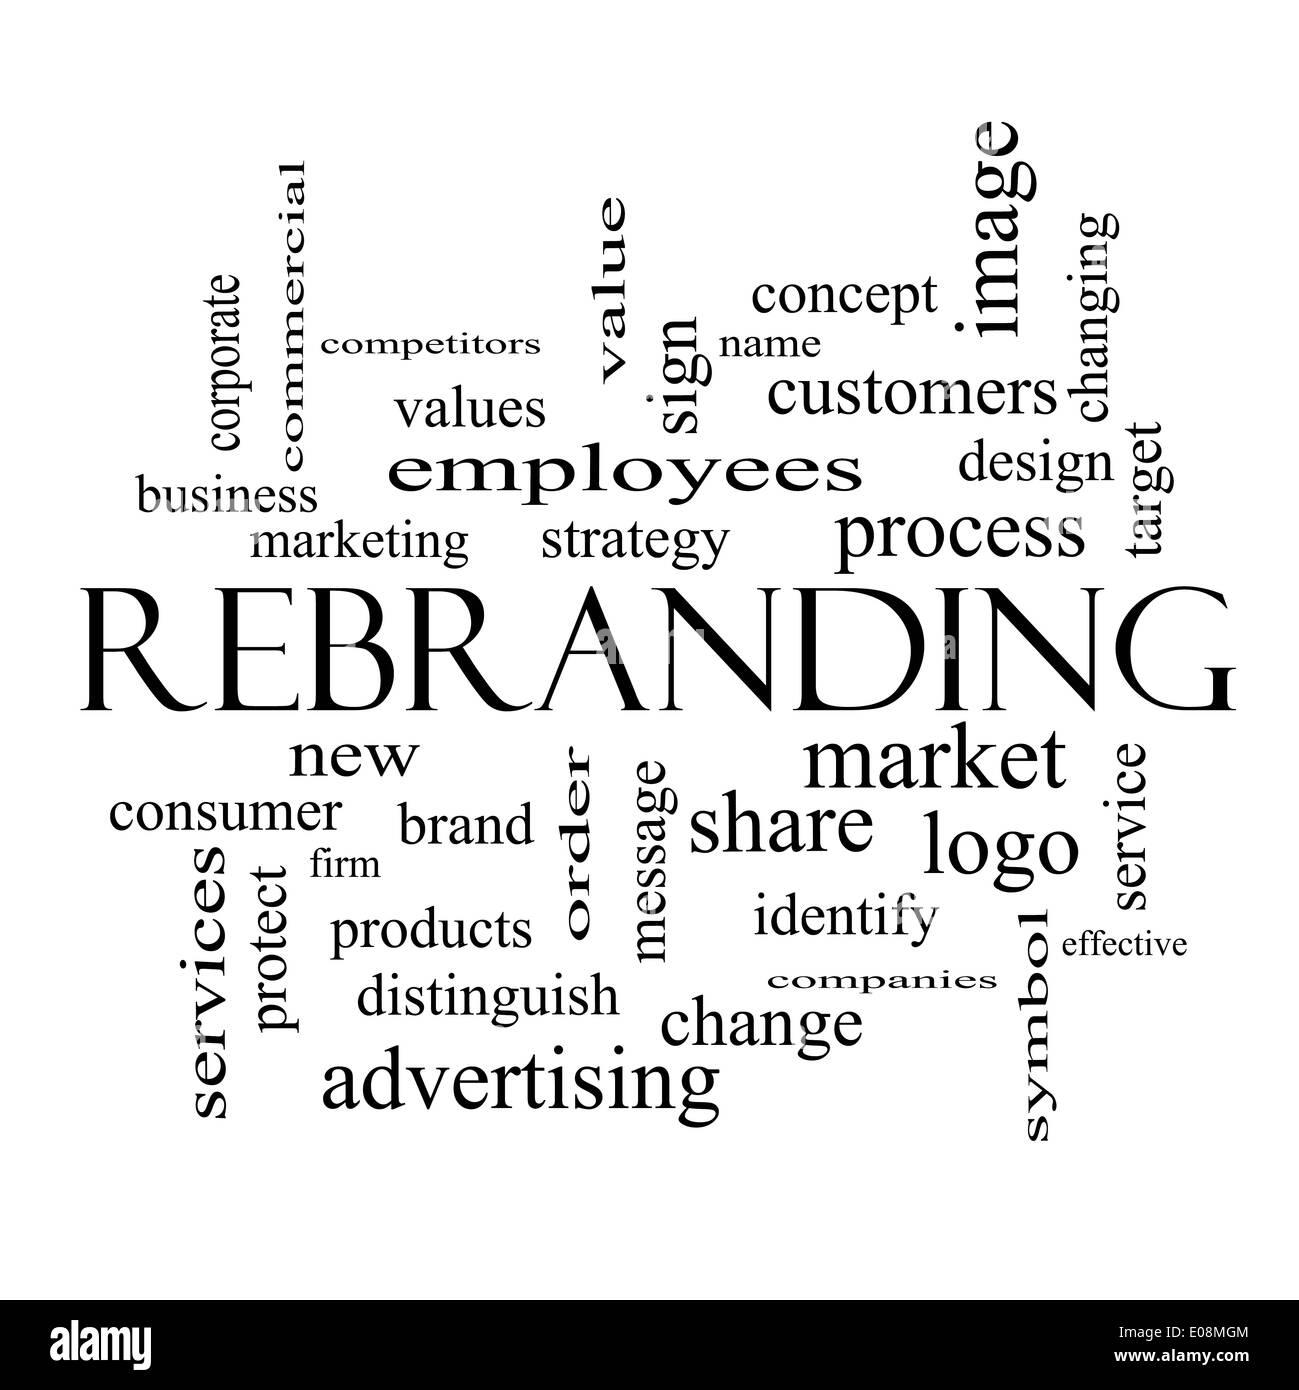 Rebranding Word Cloud Concept in black and white with great terms such as market, business, logo and more. Stock Photo